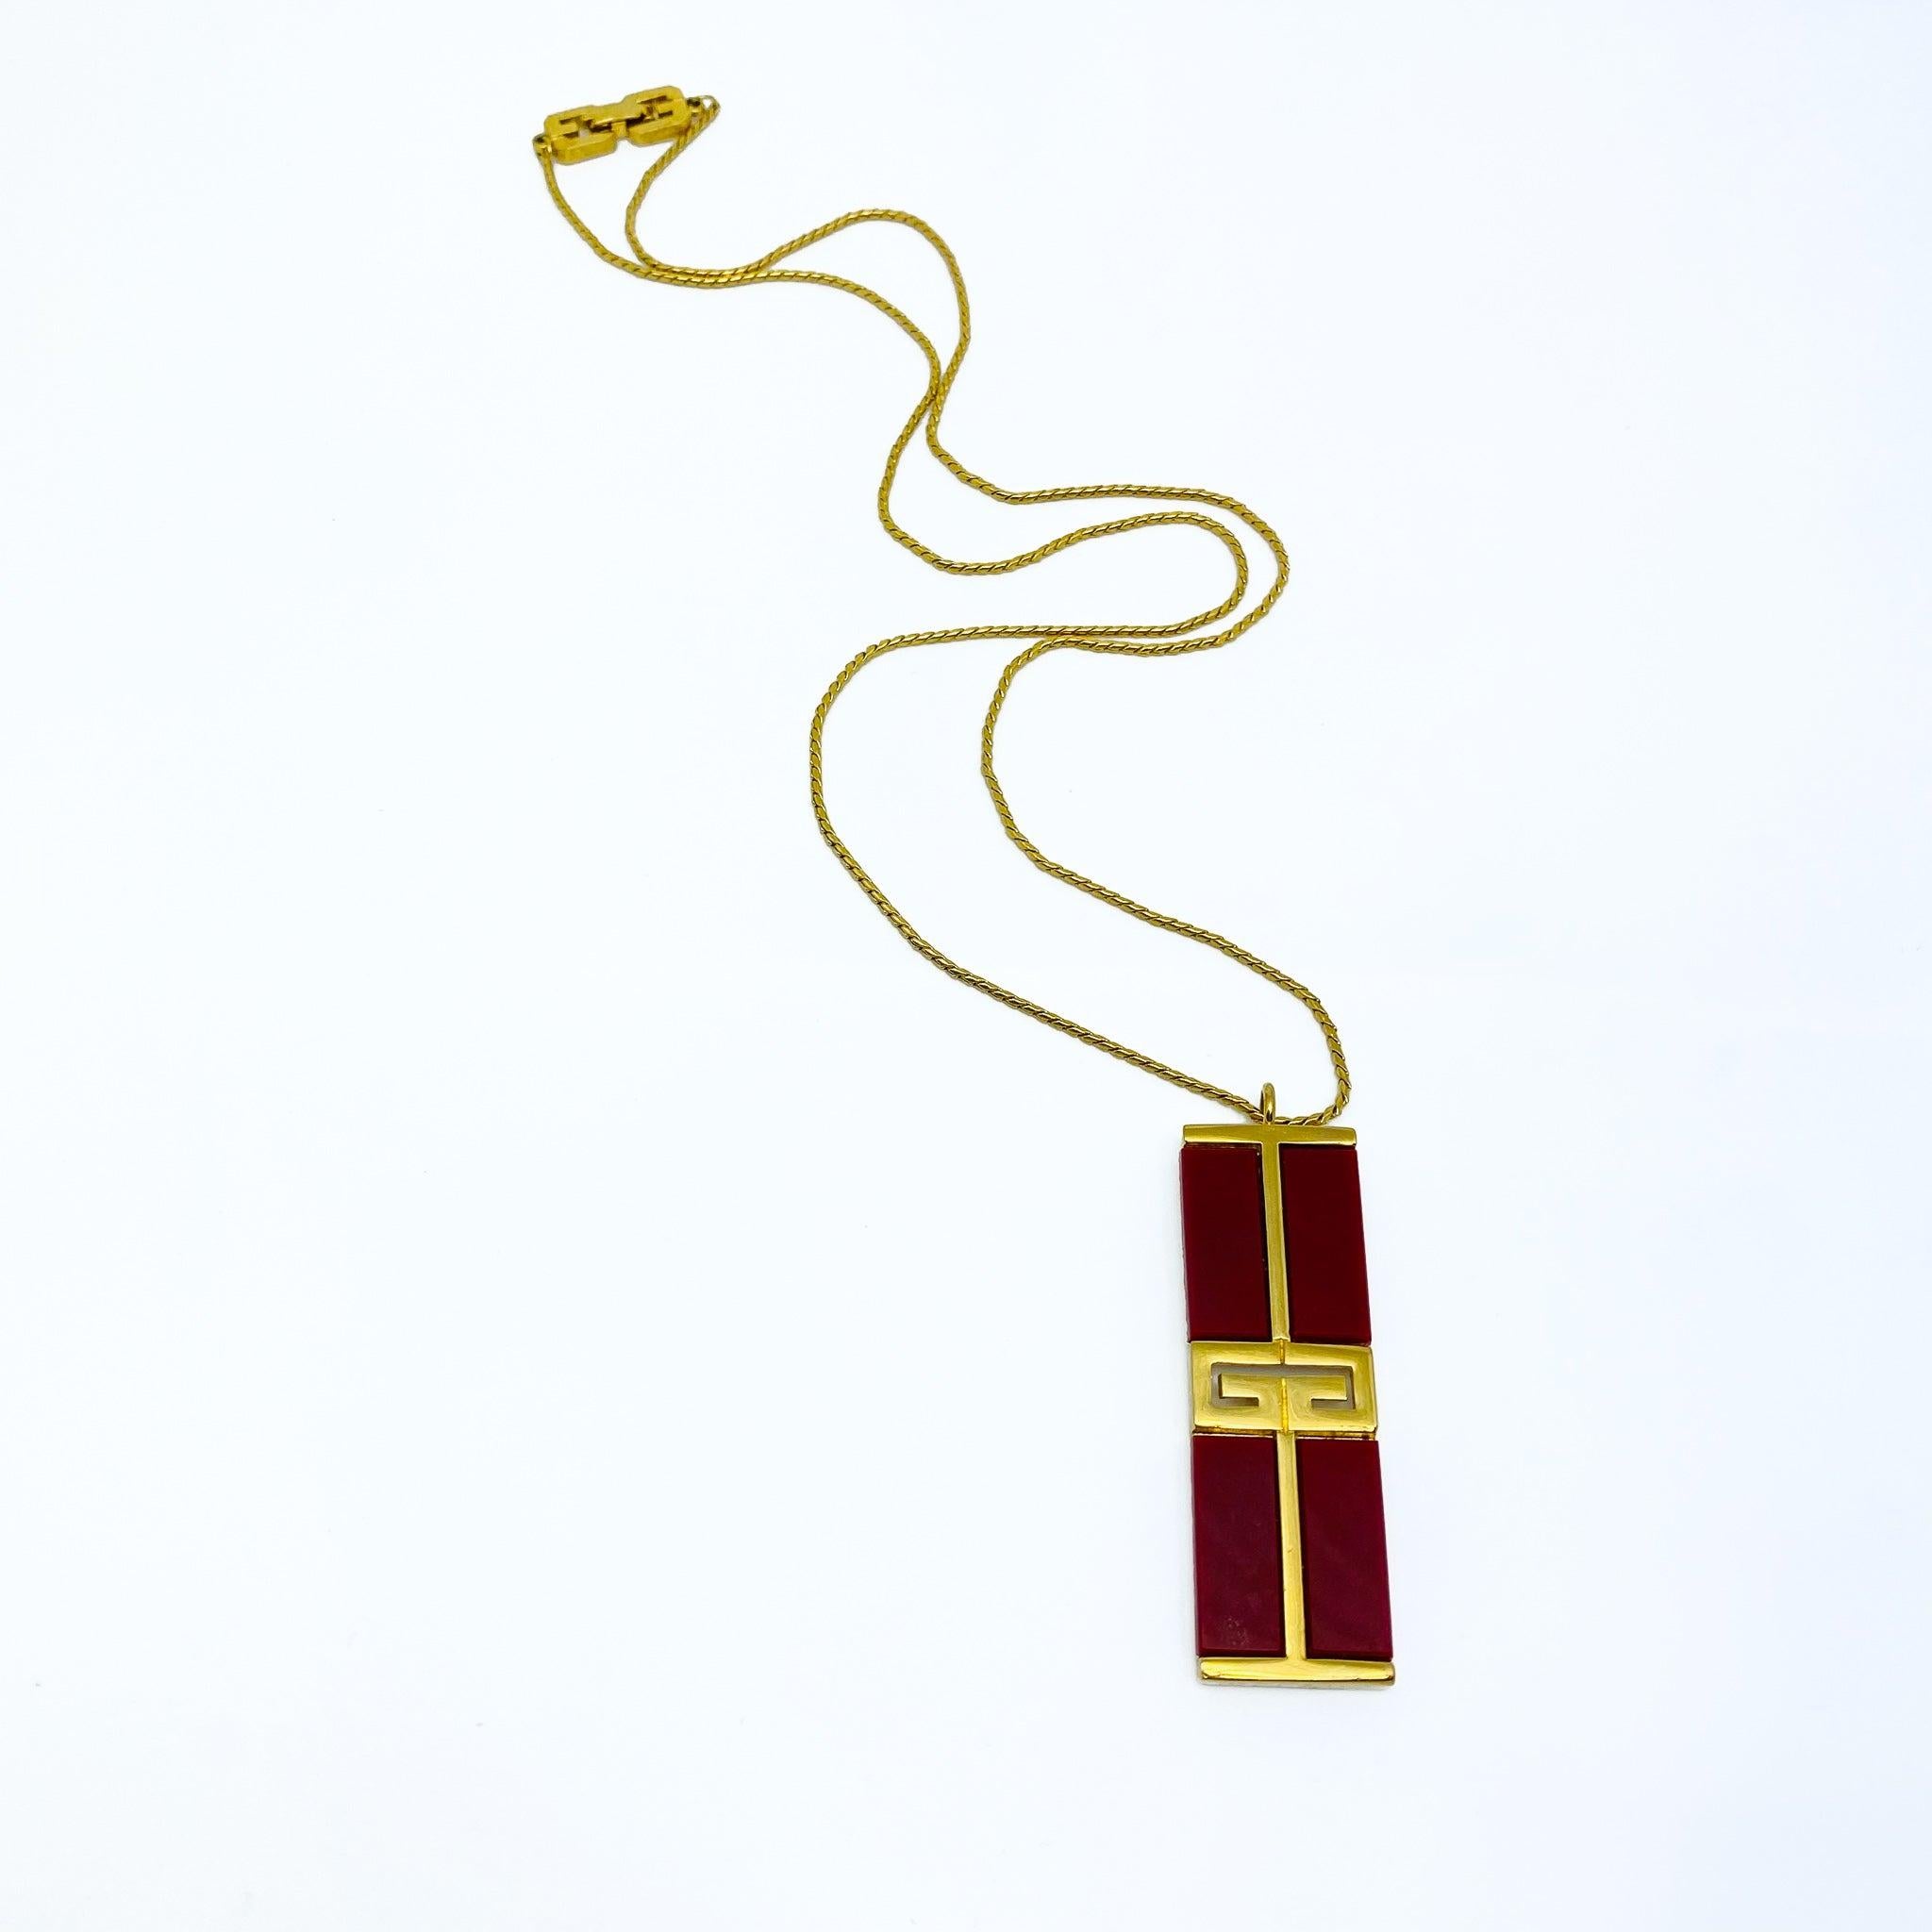 Vintage Givenchy Gold Plated Pendant Necklace 1970s - 1979 Collection In Excellent Condition For Sale In London, GB